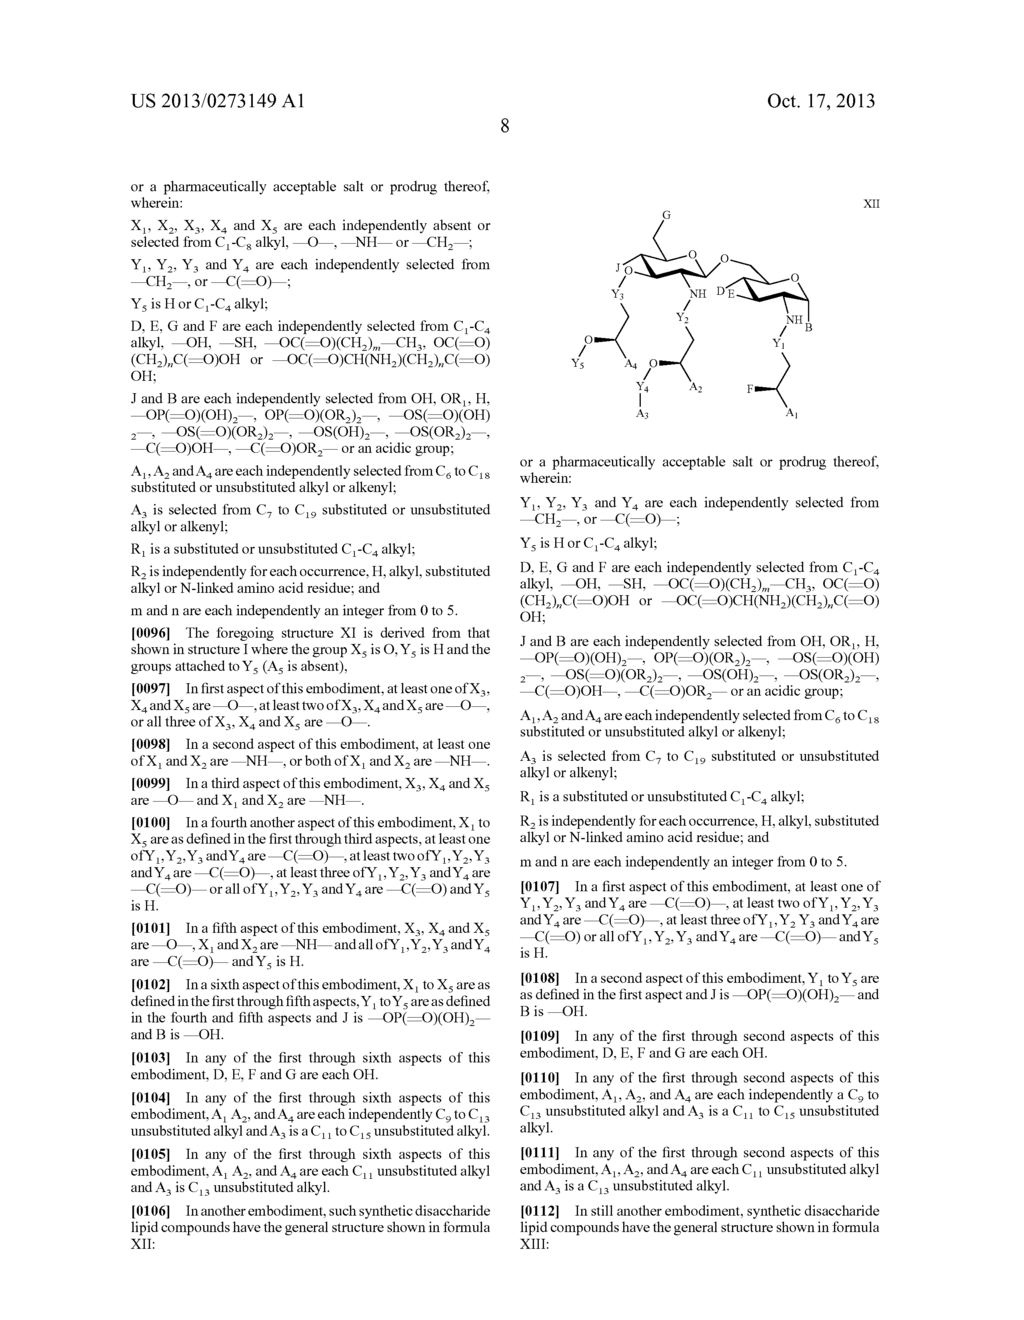 DISACCHARIDE SYNTHETIC LIPID COMPOUNDS AND USES THEREOF - diagram, schematic, and image 15